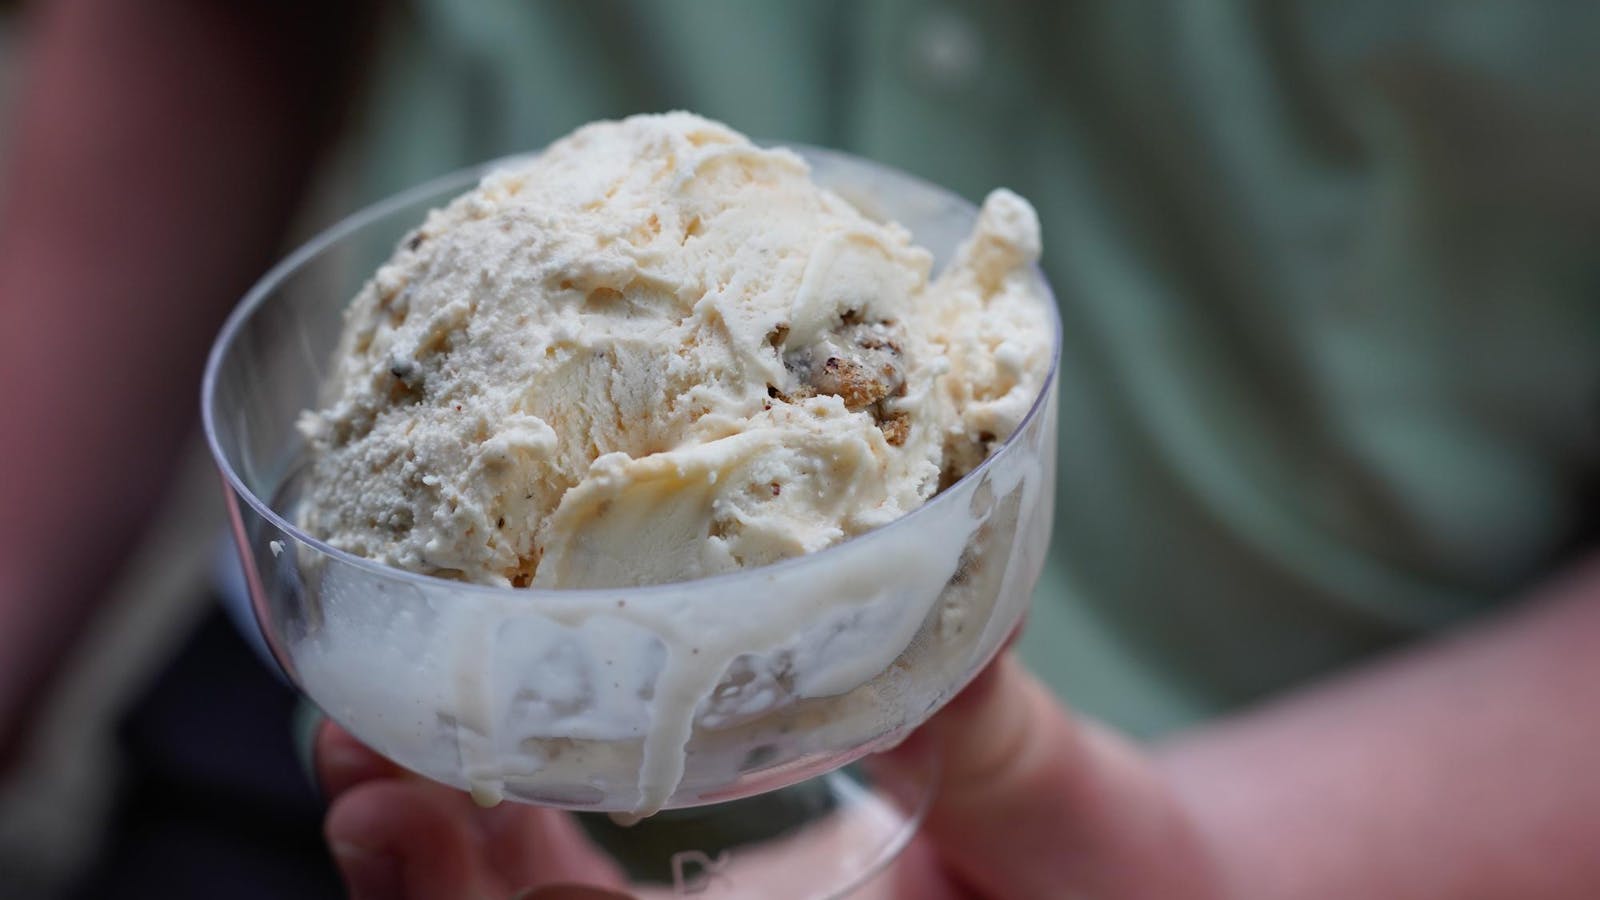 Cricket Crunch: MSU Dairy Store, Department of Entomology partner for symposium to create new ice cream flavor - The State News